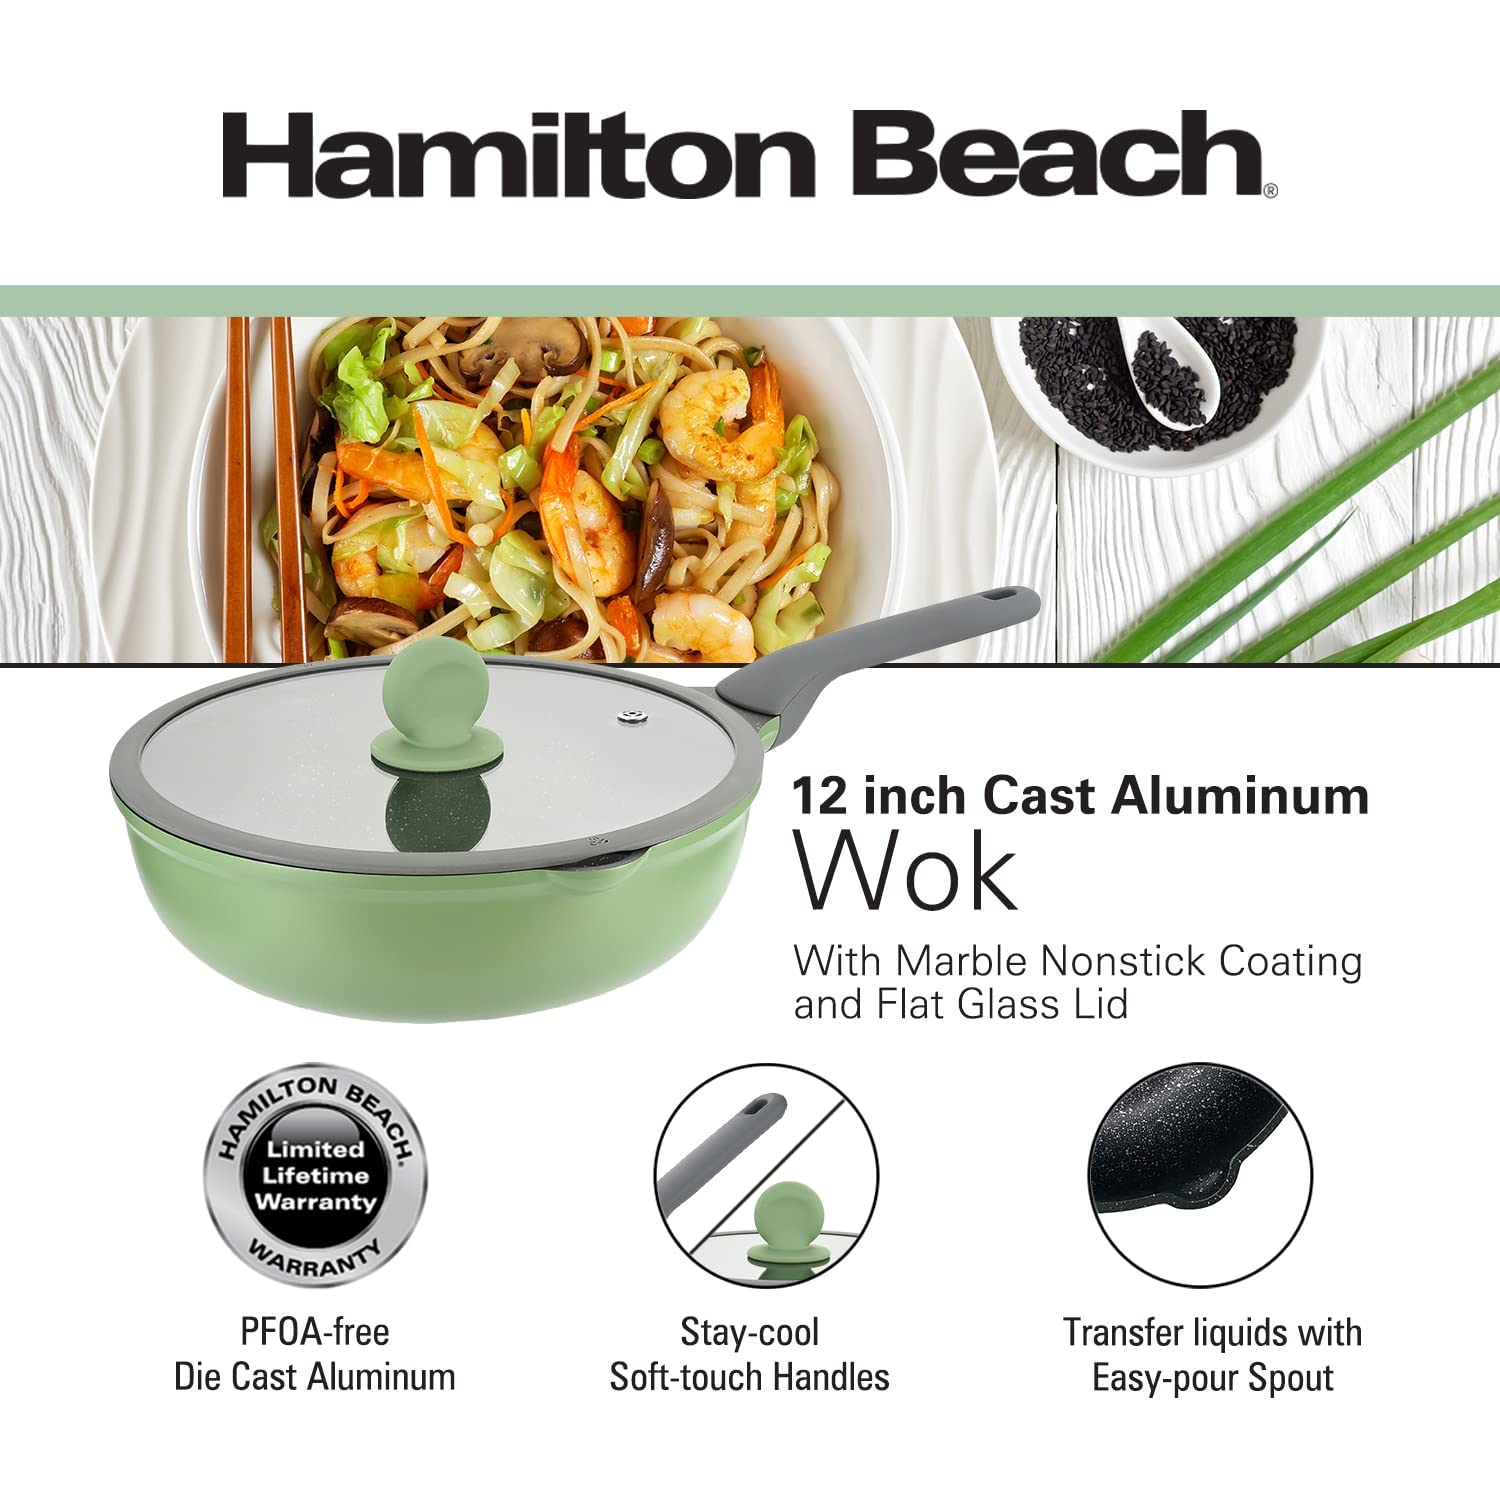 Hamilton Beach 5.5 Quart Dutch Oven Green with Marble Nonstick Coating,Die-Cast Aluminum Dutch Oven Pot Induction bottom, Gray Soft Touch Handle, Glass Lid with Silicone Rim for Cooking